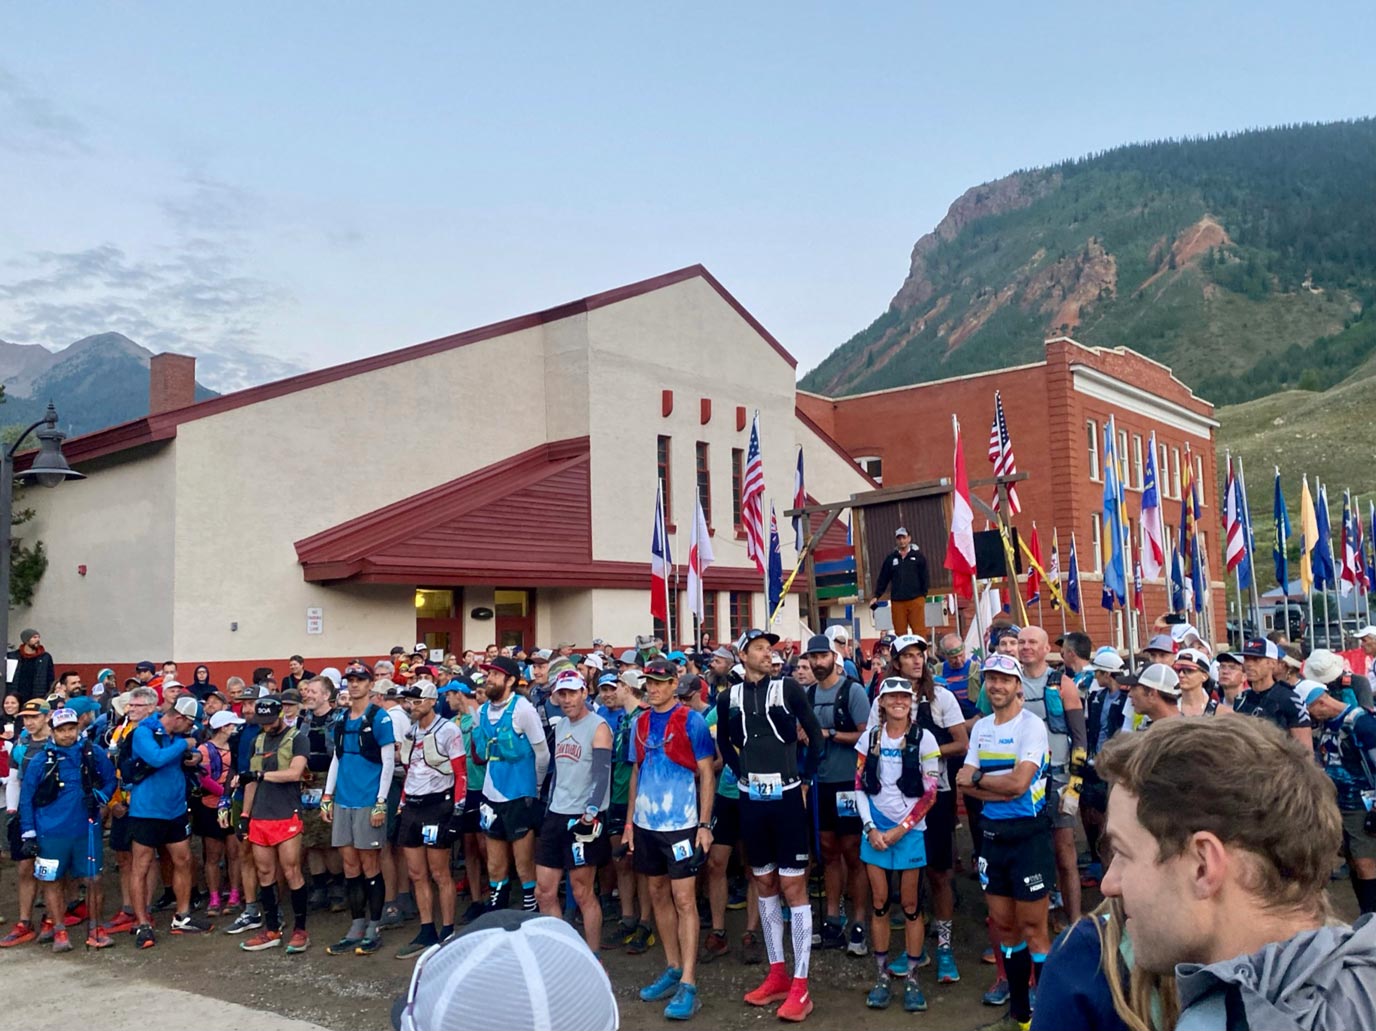 The 2021 Hardrock 100: Sabrina Stanley Defends as Champion & Jeff Browning Delivers in a Record-Breaking Race